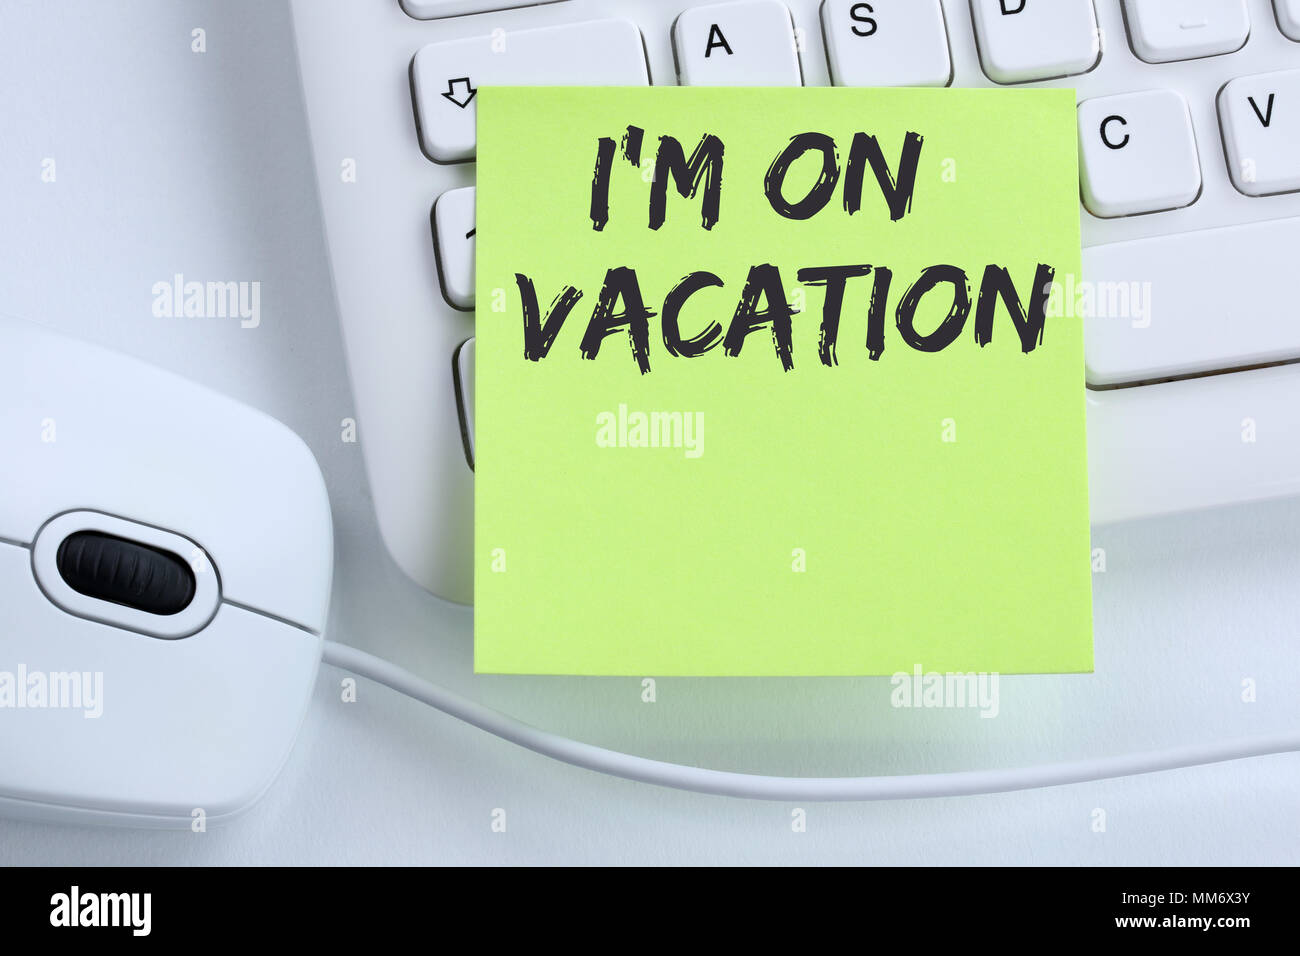 I'm on vacation travel traveling holiday holidays relax relaxed break free time business concept mouse computer keyboard Stock Photo